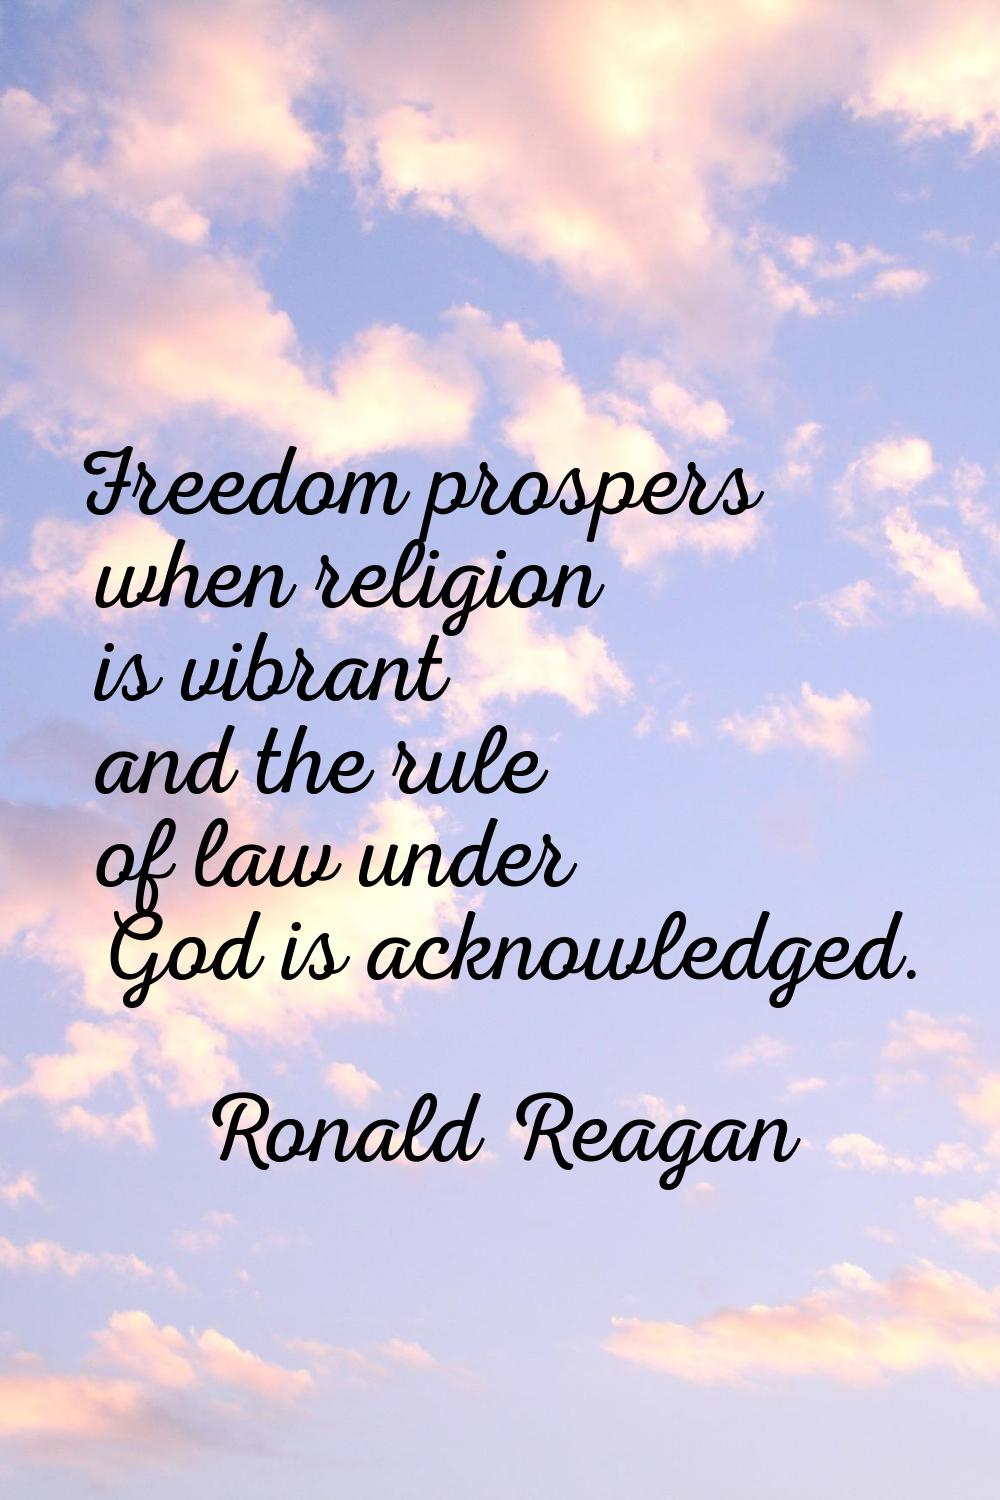 Freedom prospers when religion is vibrant and the rule of law under God is acknowledged.